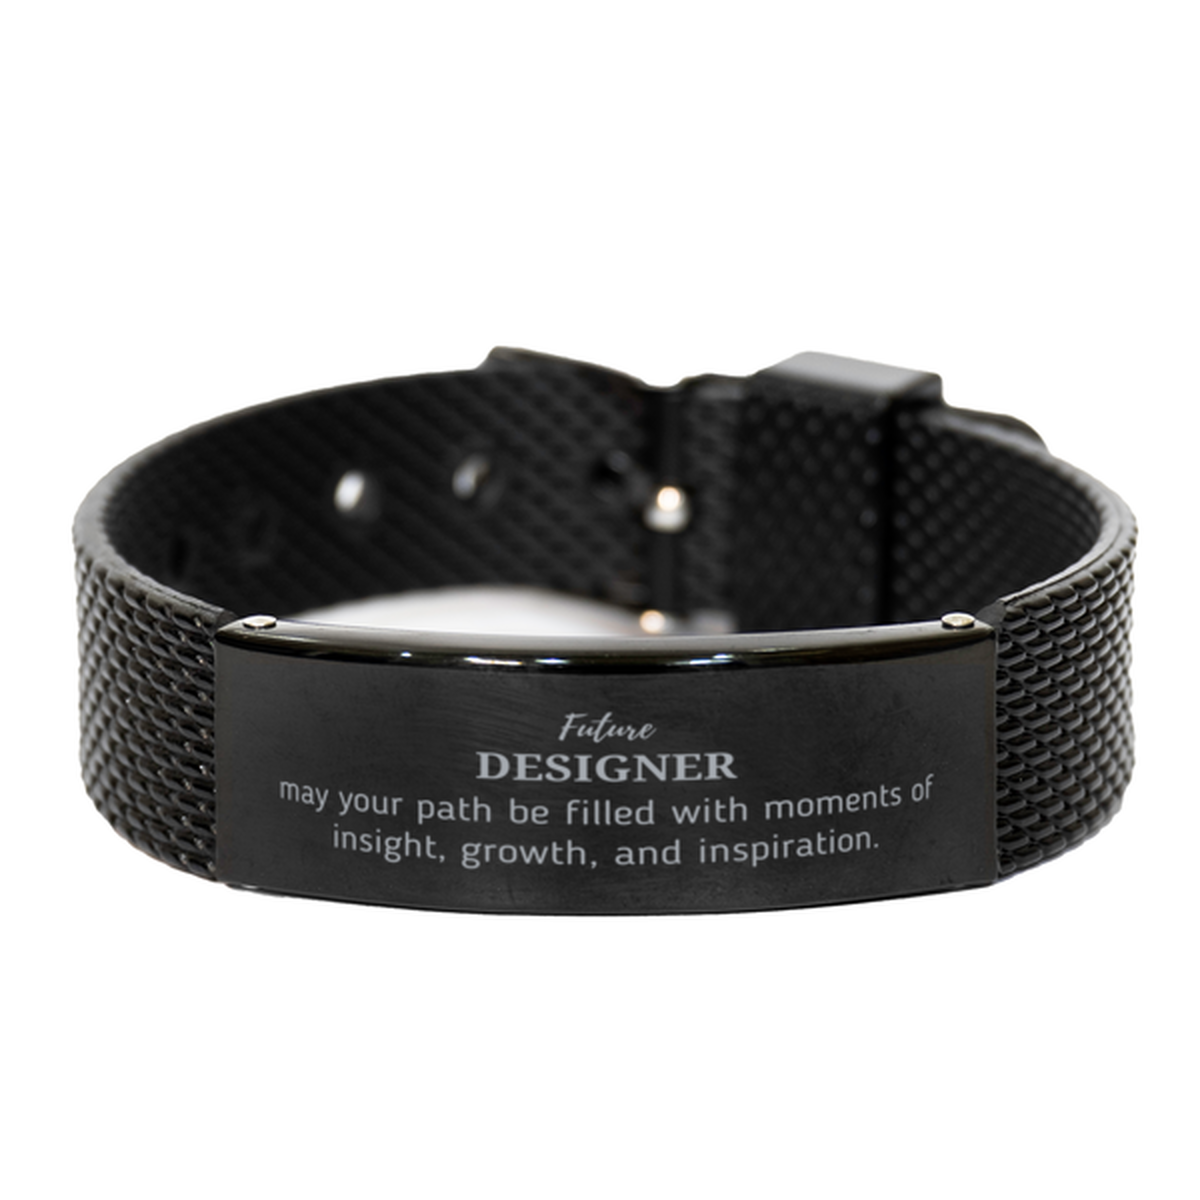 Future Designer Gifts, May your path be filled with moments of insight, Graduation Gifts for New Designer, Christmas Unique Black Shark Mesh Bracelet For Men, Women, Friends